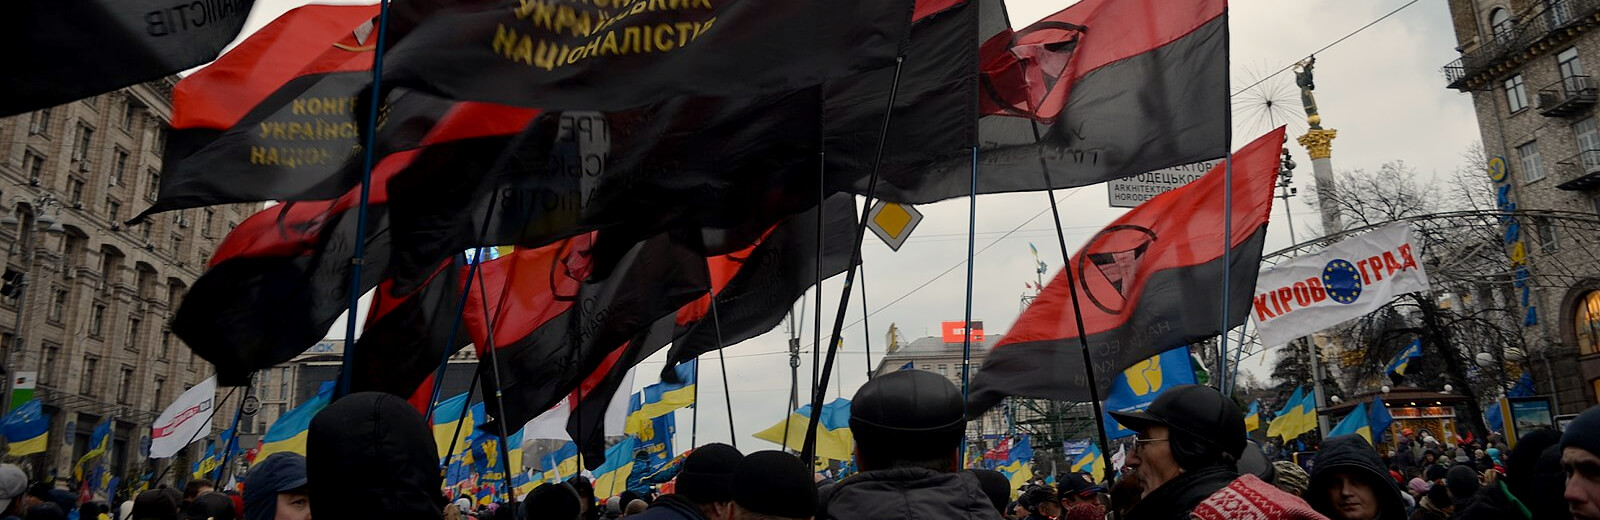 Euromaidan protestors holding blood and soil flags in Kyiv